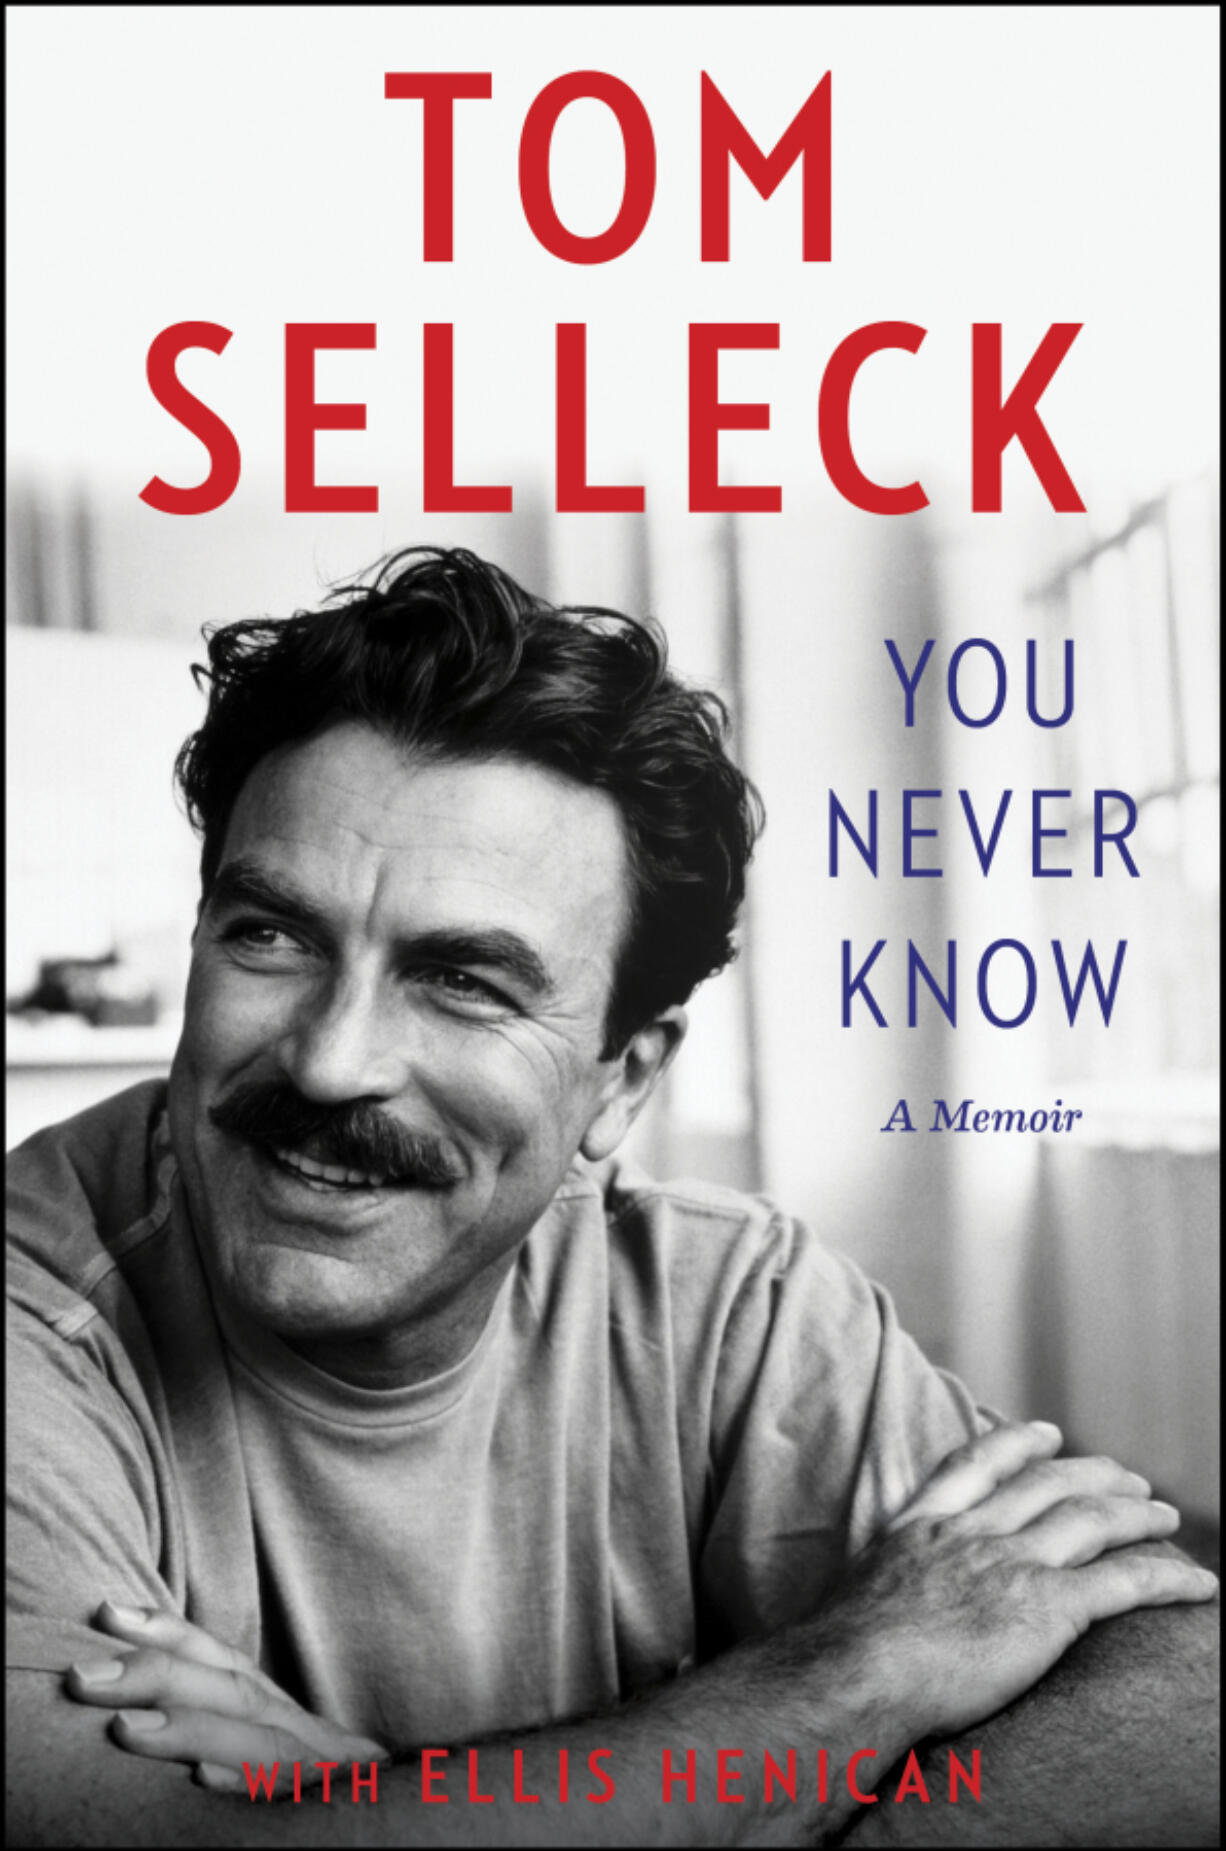 This cover image released by Dey Street Books shows &ldquo;You Never Know&rdquo; a memoir by Tom Selleck with Ellis Henican.